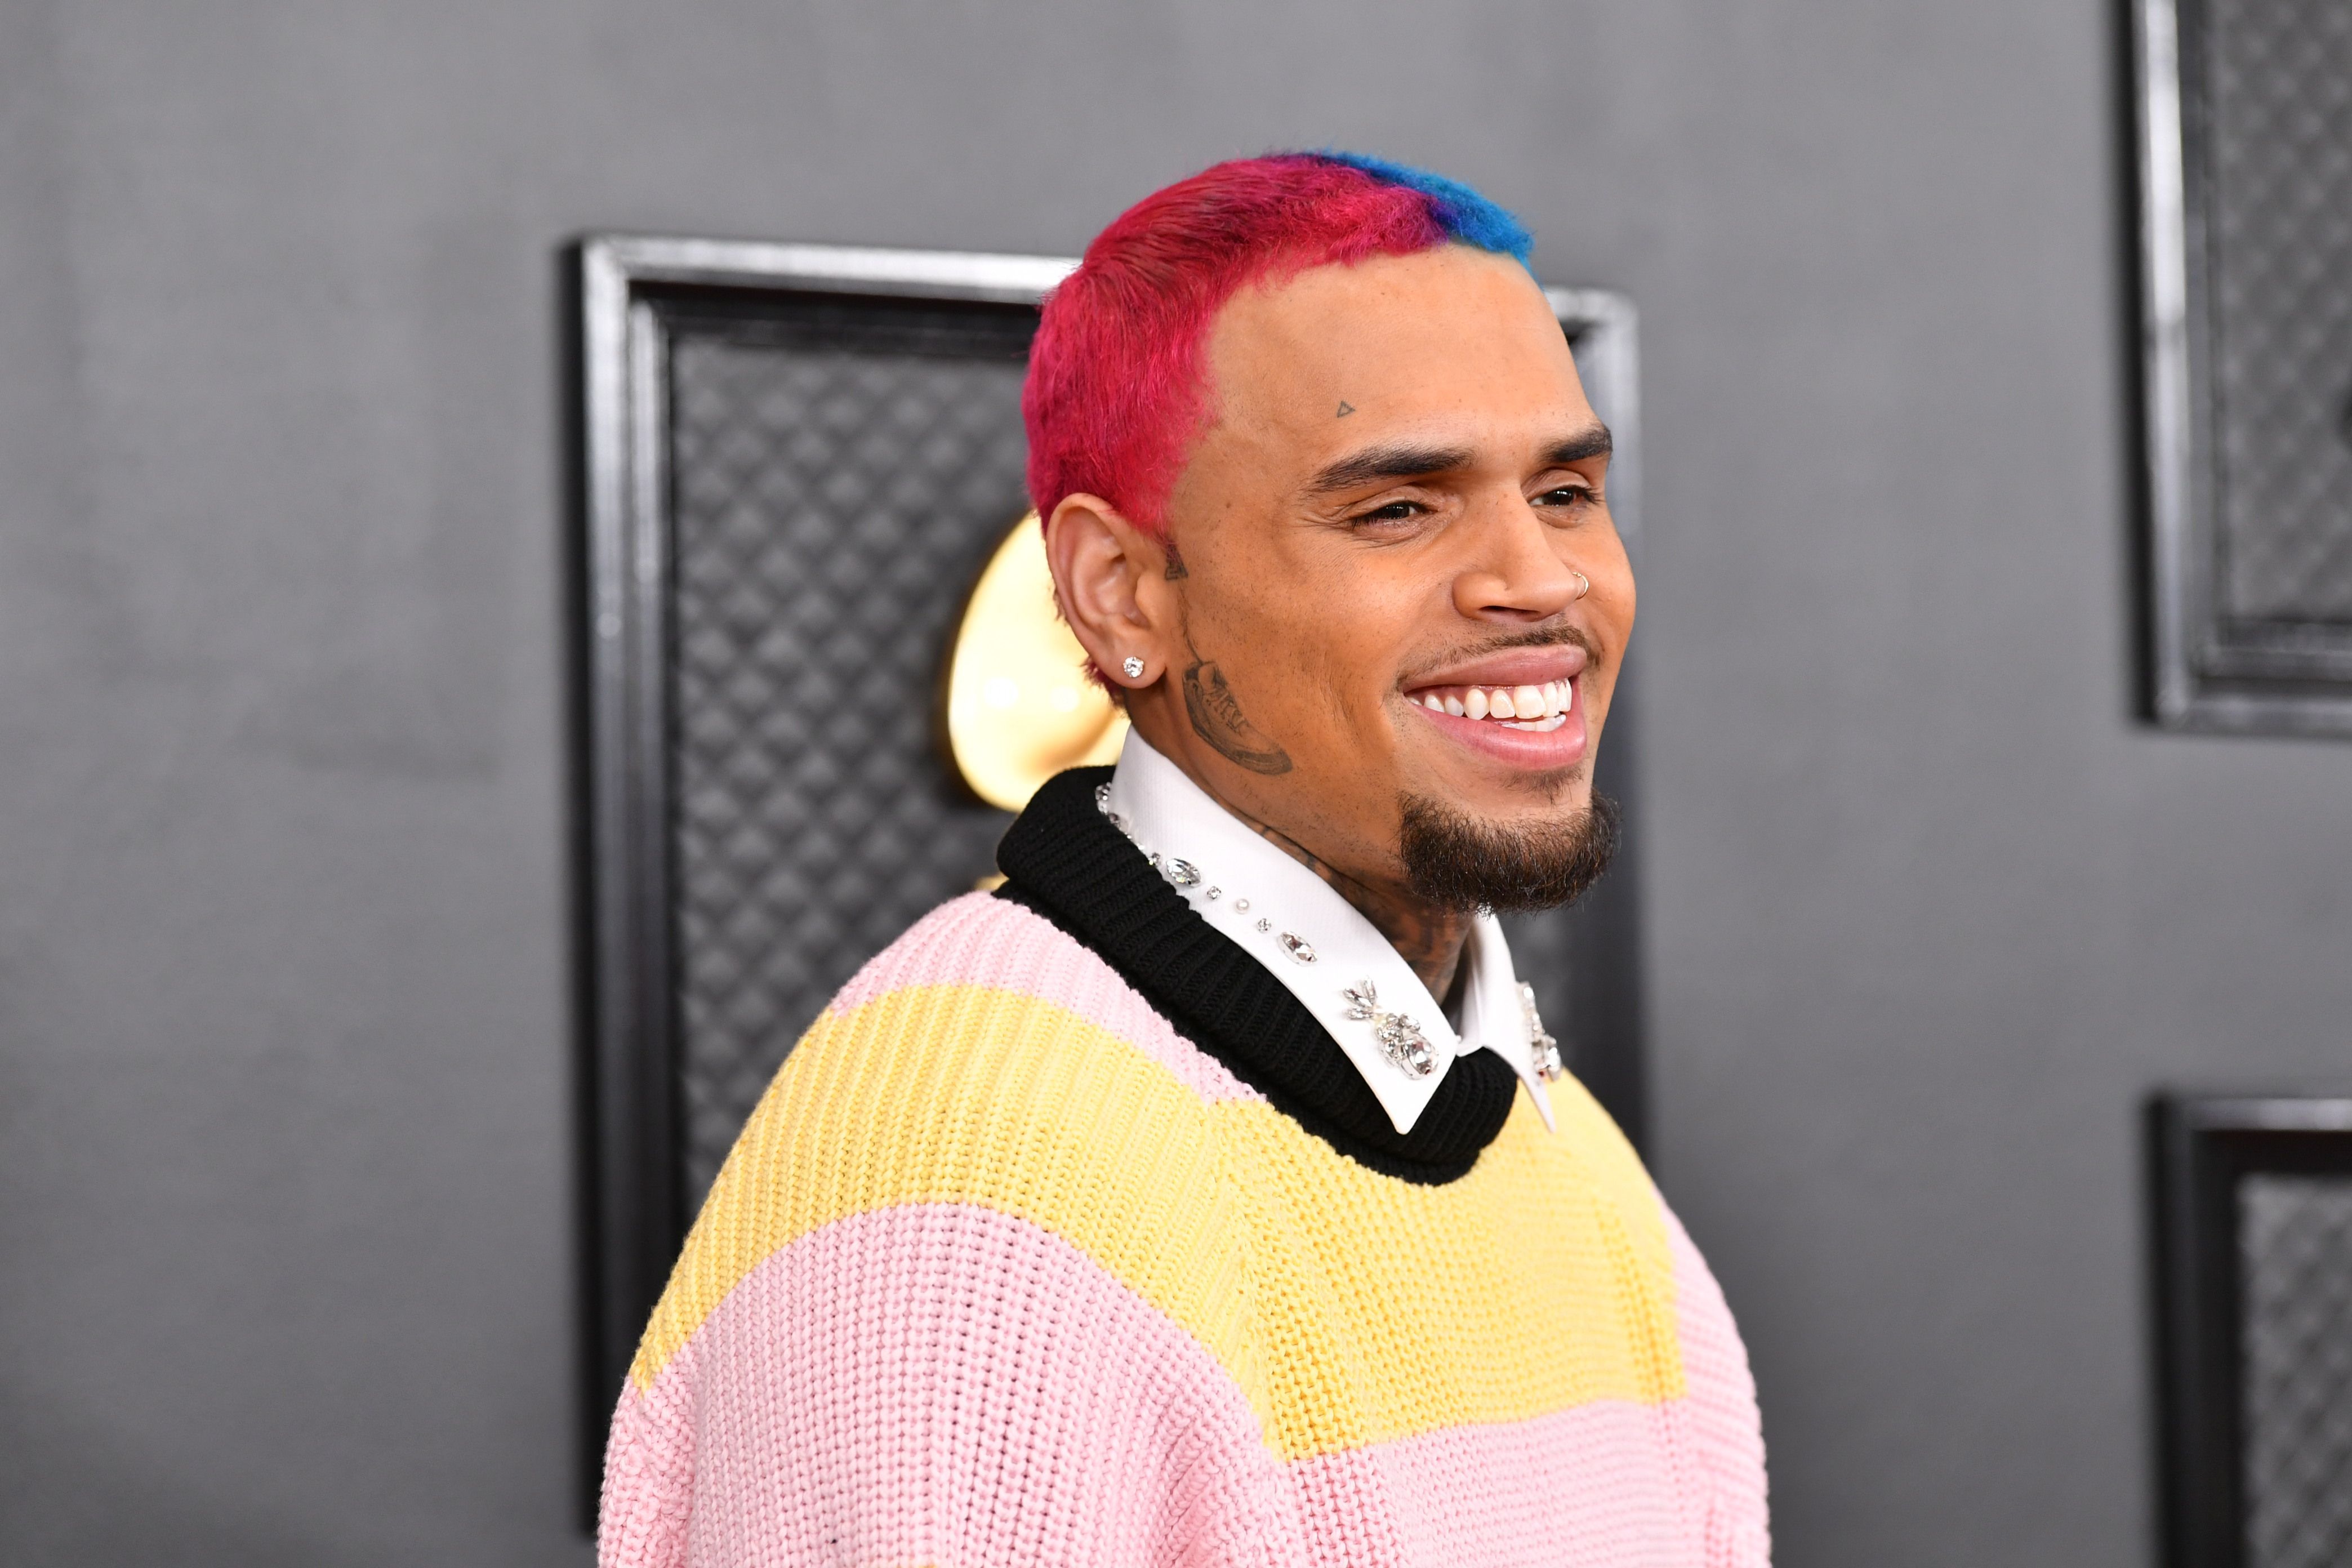 Chris Brown at the 62nd Annual GRAMMY Awards in January 2020 in Los Angeles, California | Source: Getty Images